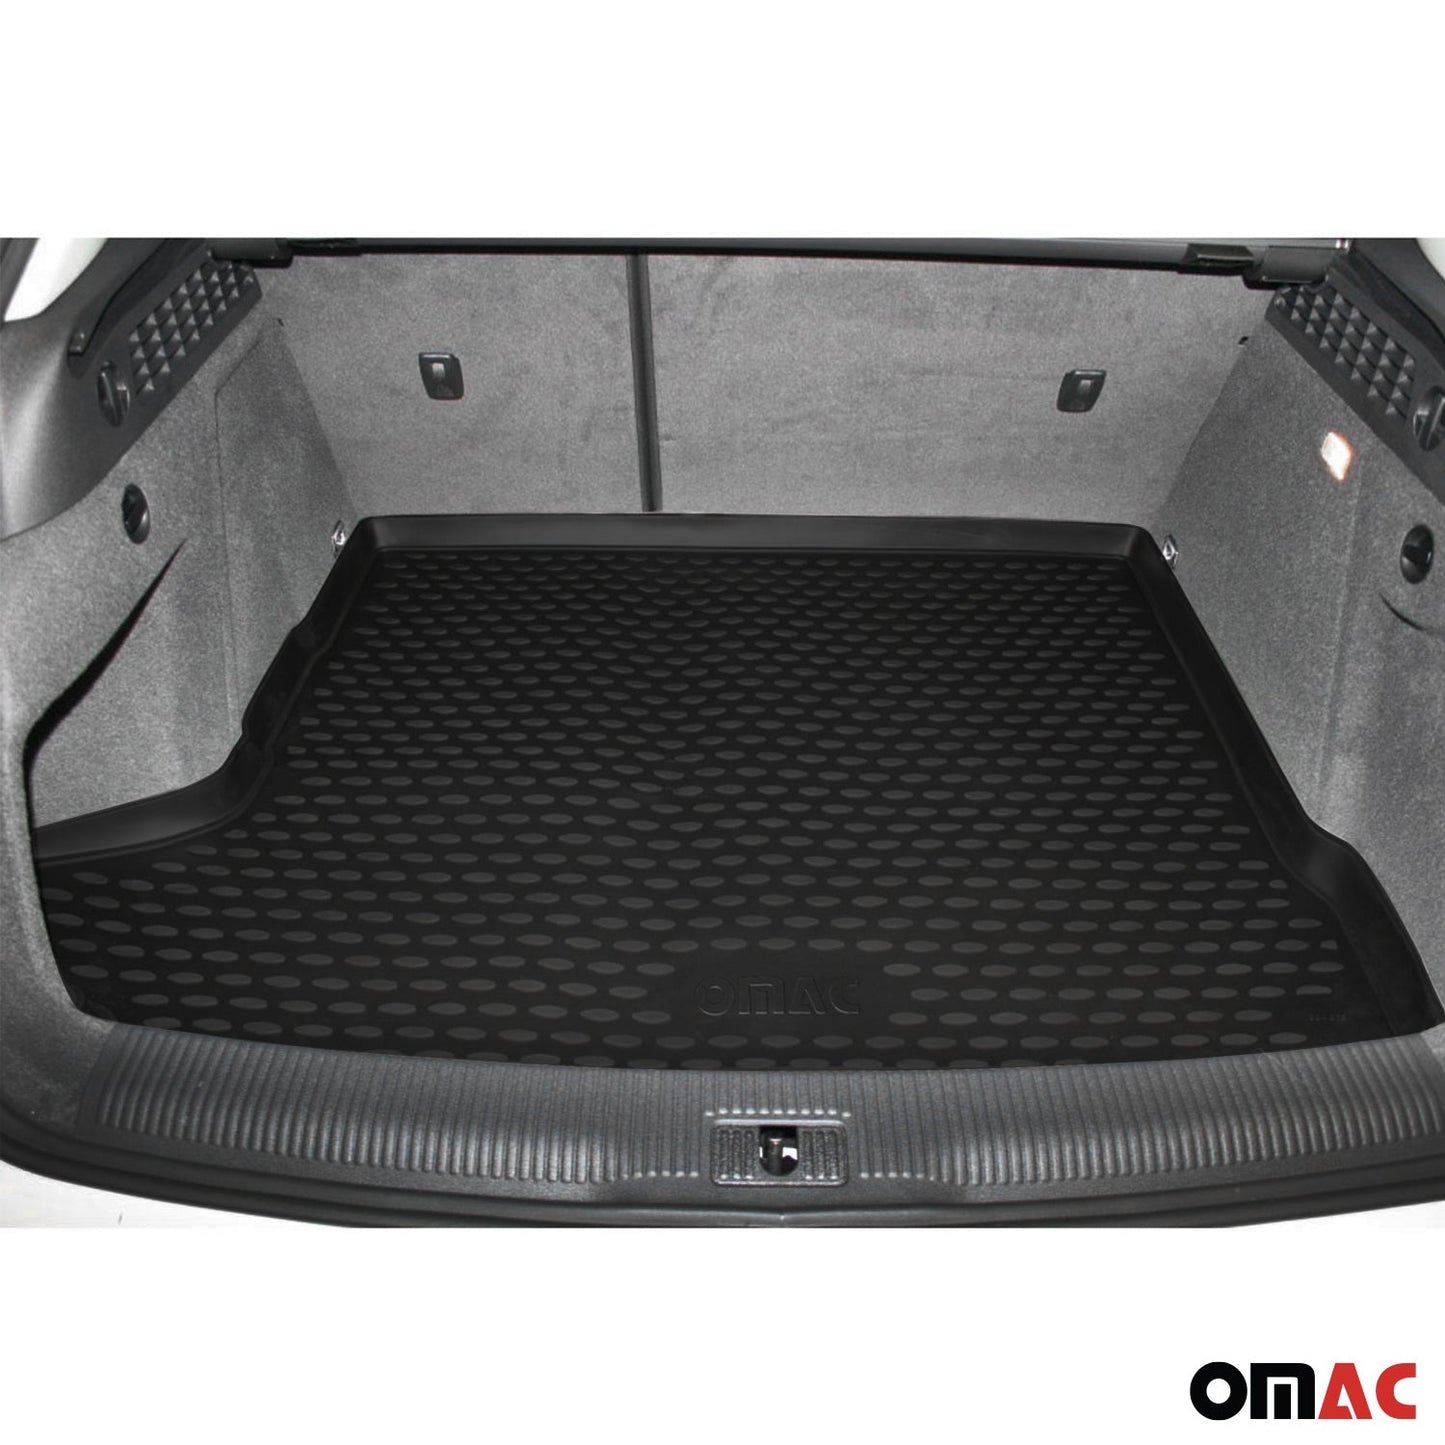 OMAC Cargo Liner For BMW X6 2008-2019 Rear Trunk Floor Mat 3D Molded Boot Tray Black 1211250